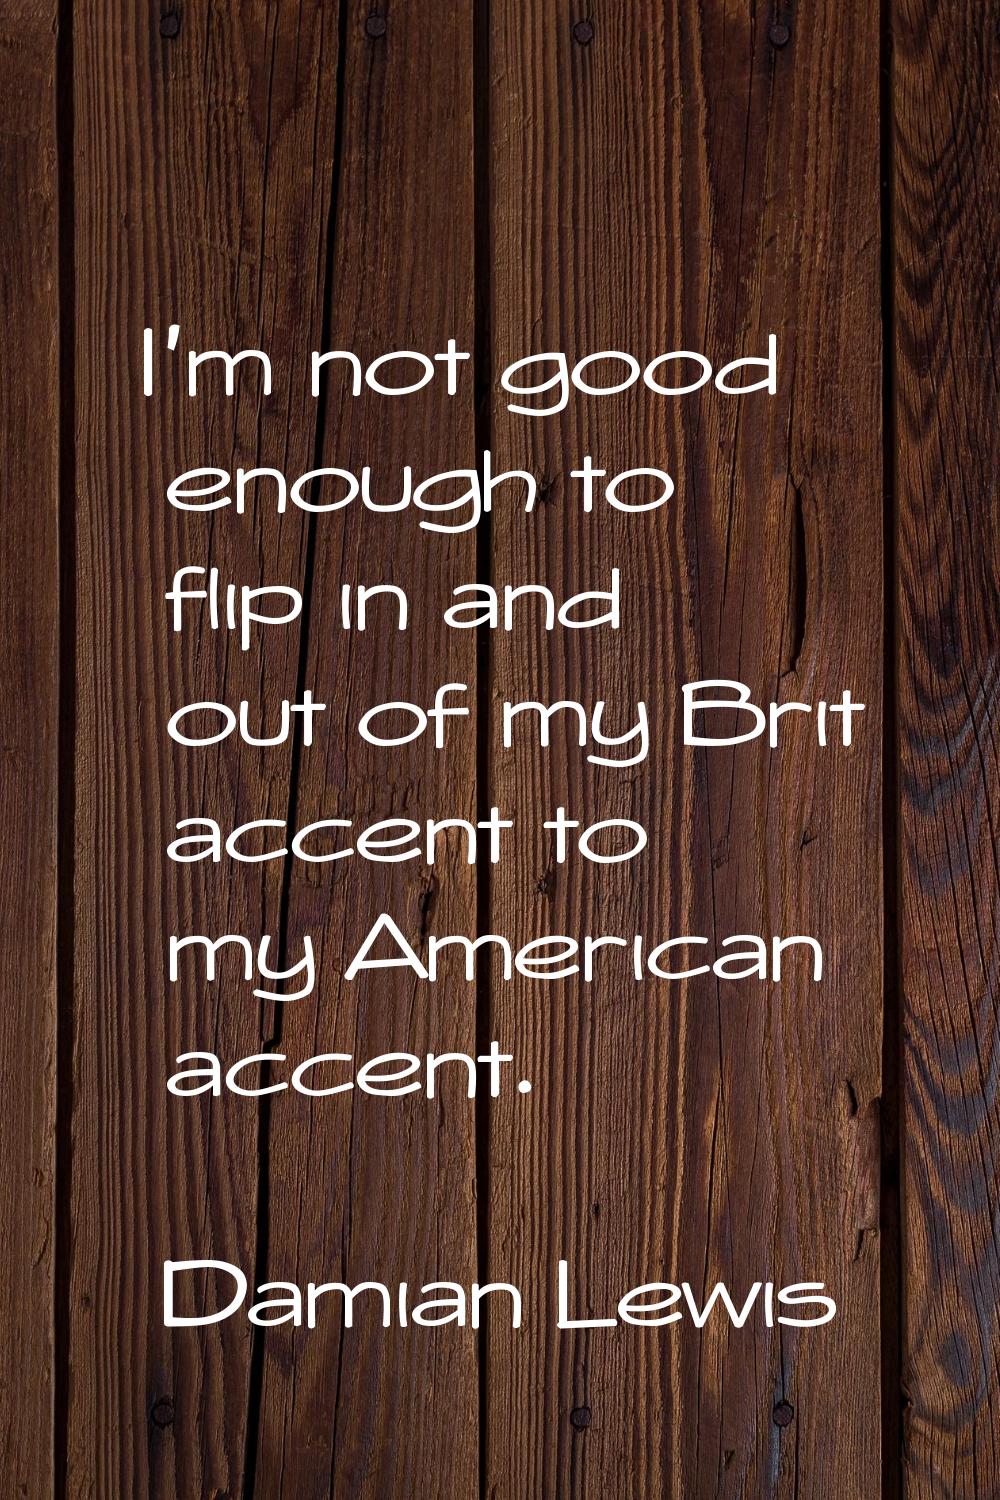 I'm not good enough to flip in and out of my Brit accent to my American accent.